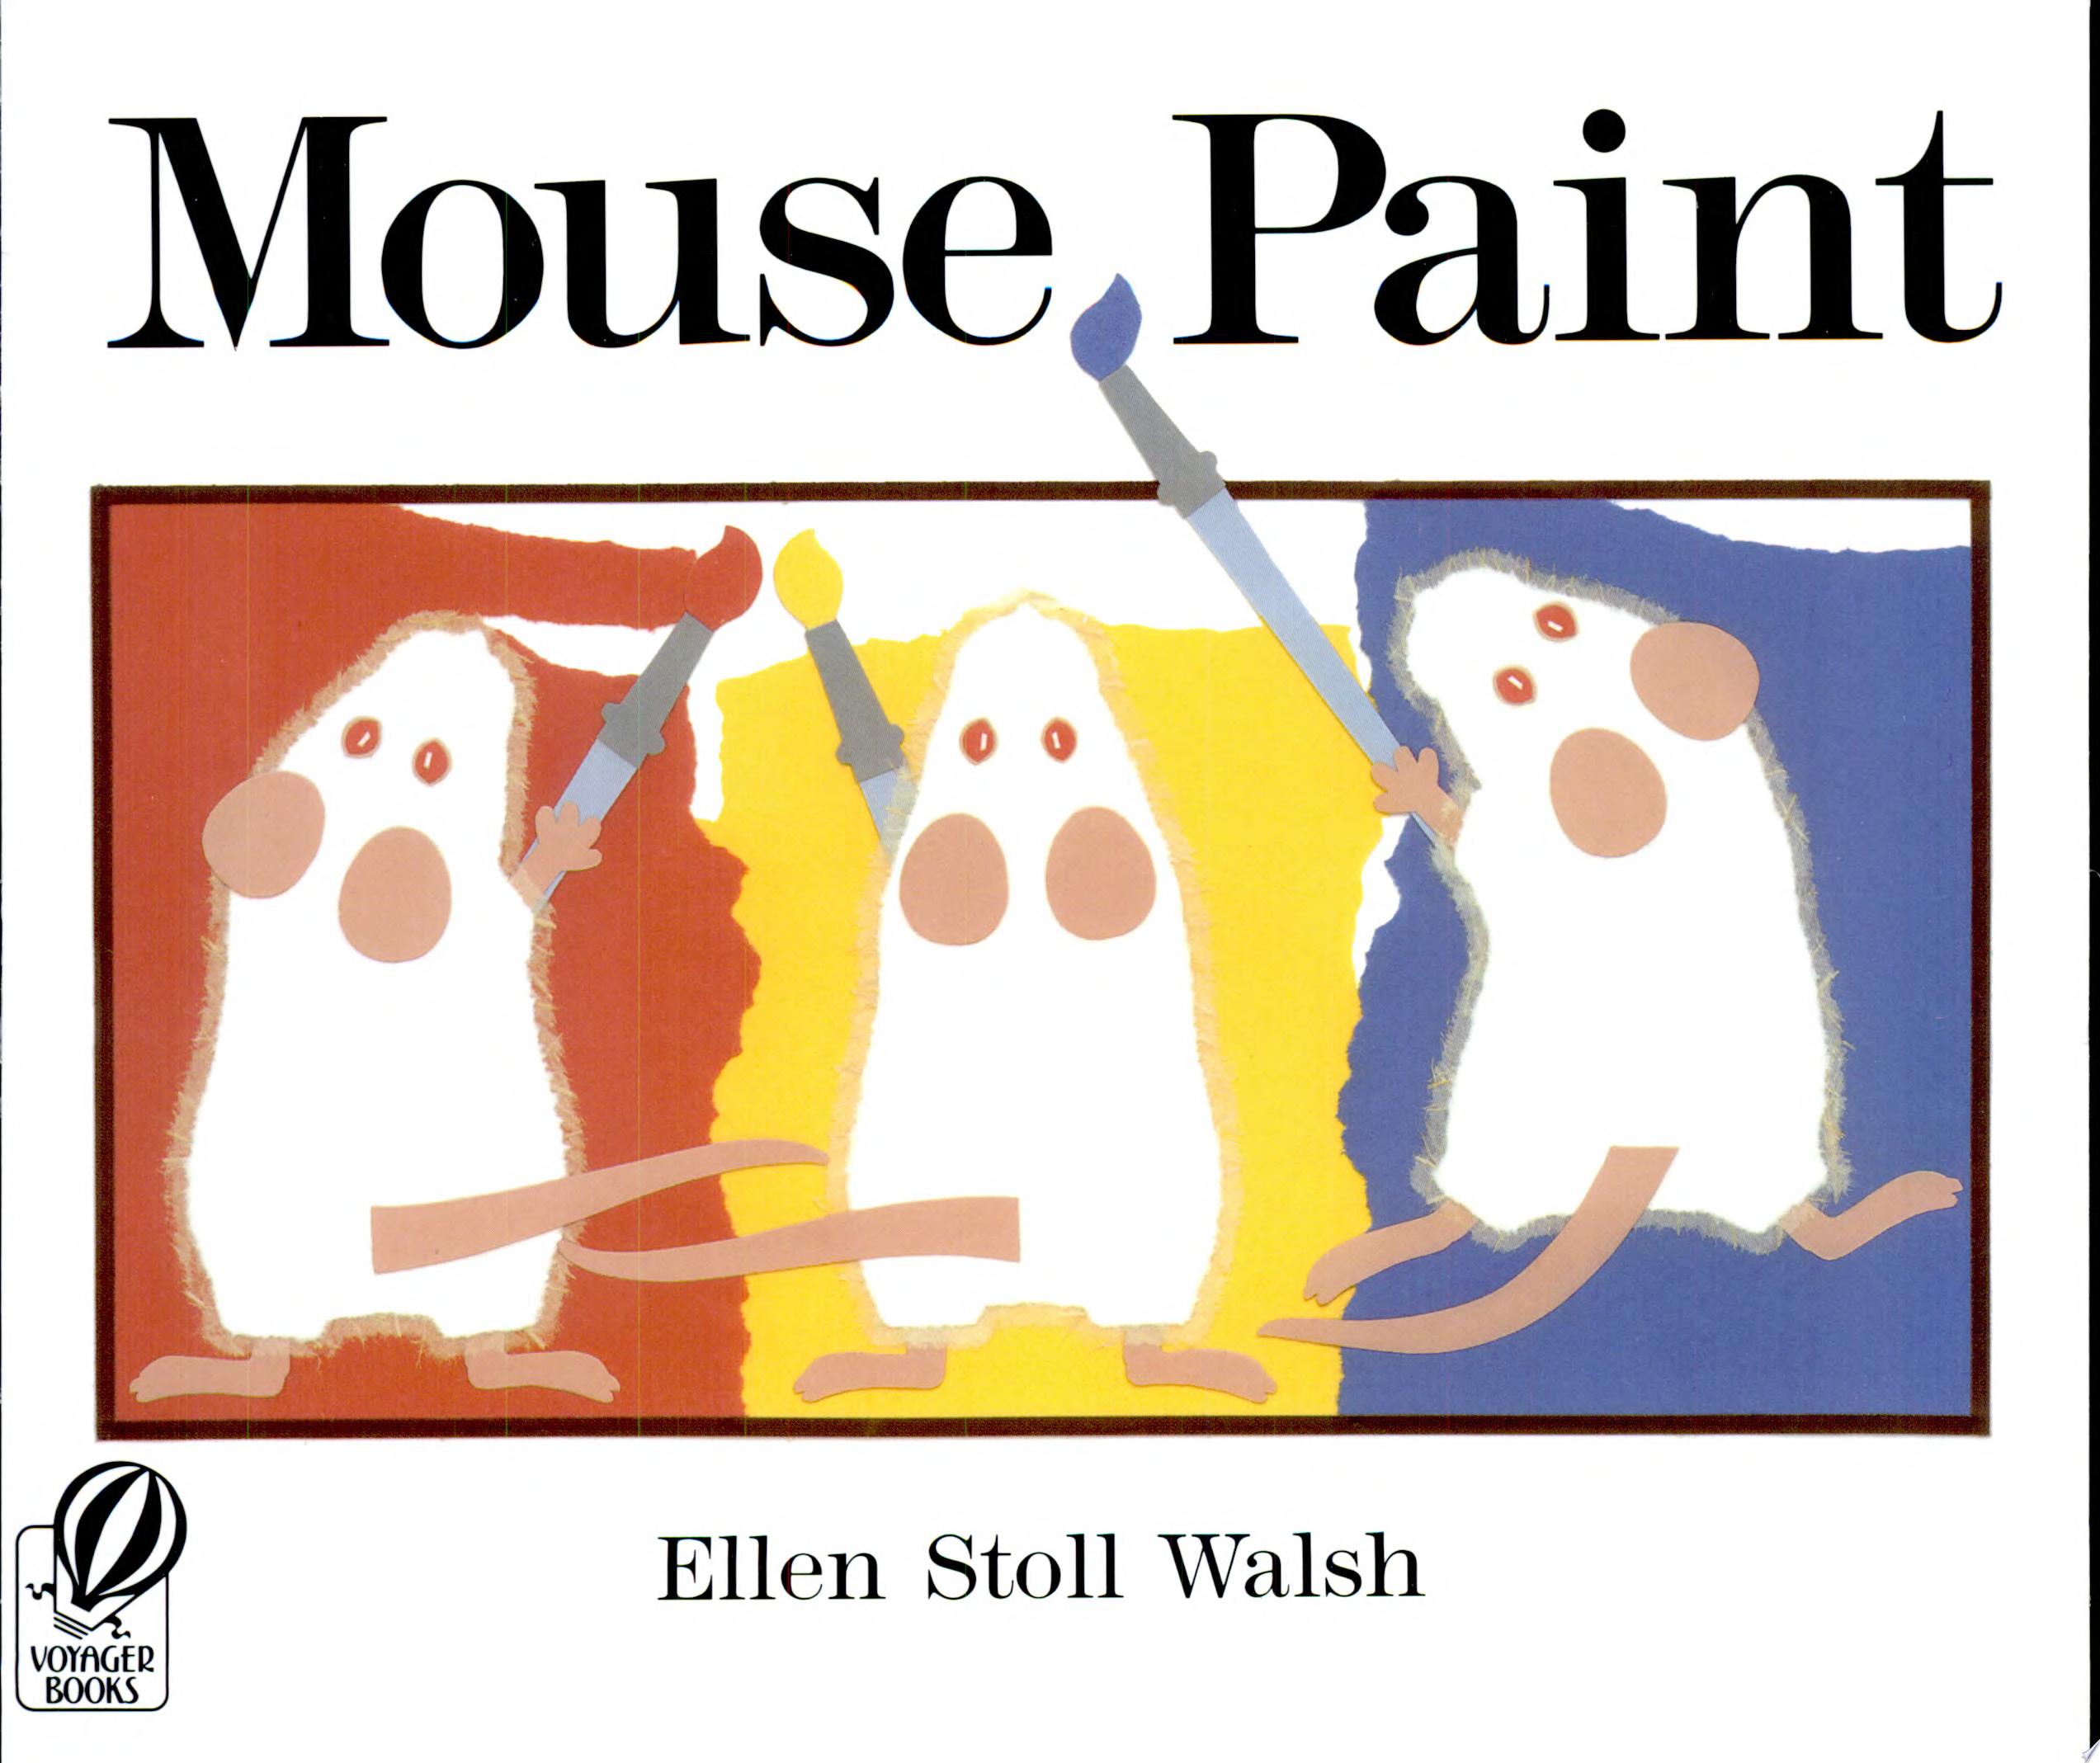 Image for "Mouse Paint"